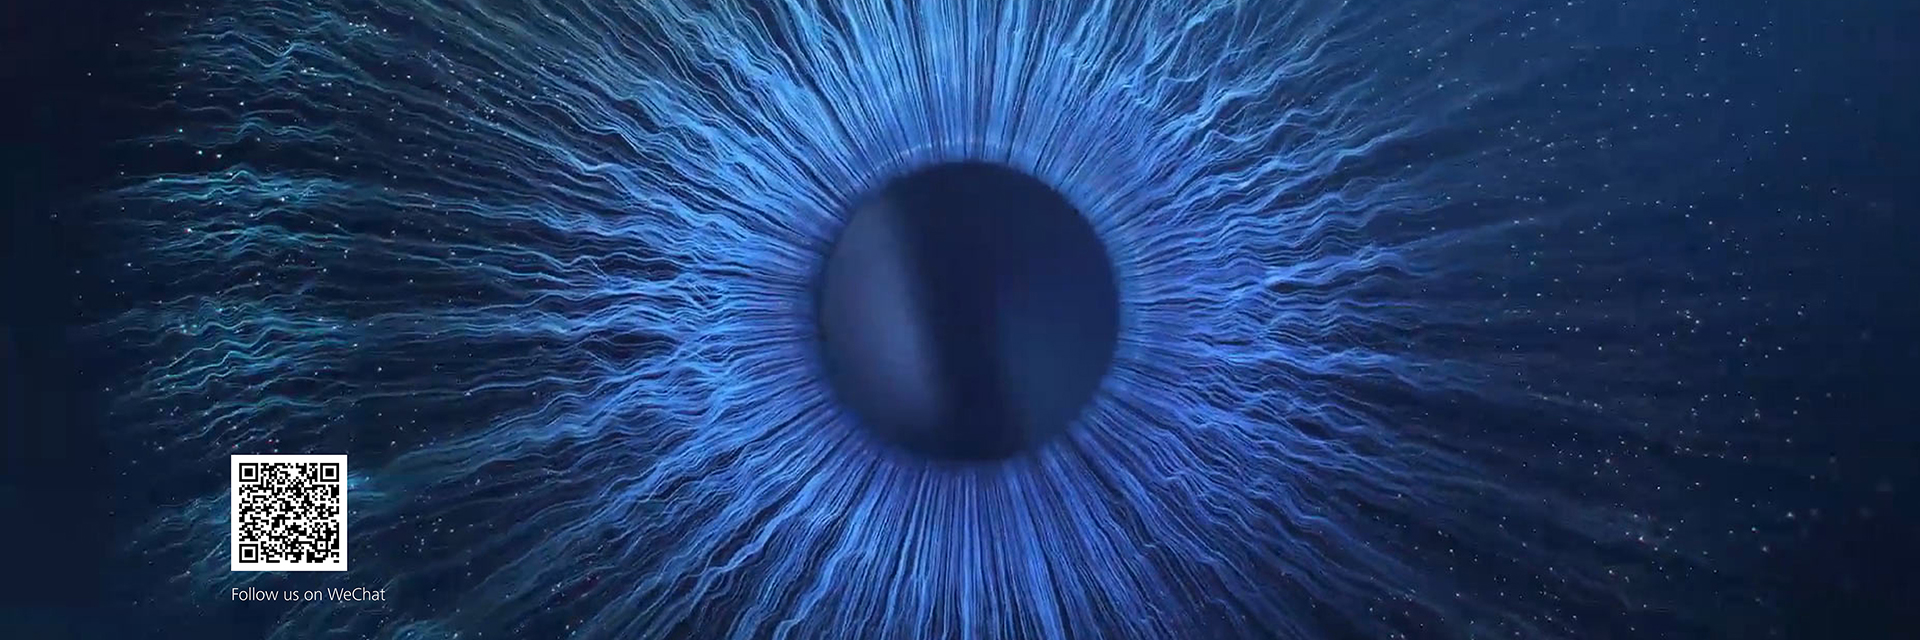 Challenge the Limits of Imagination motion - a close up of a blue eyeball in the dark.